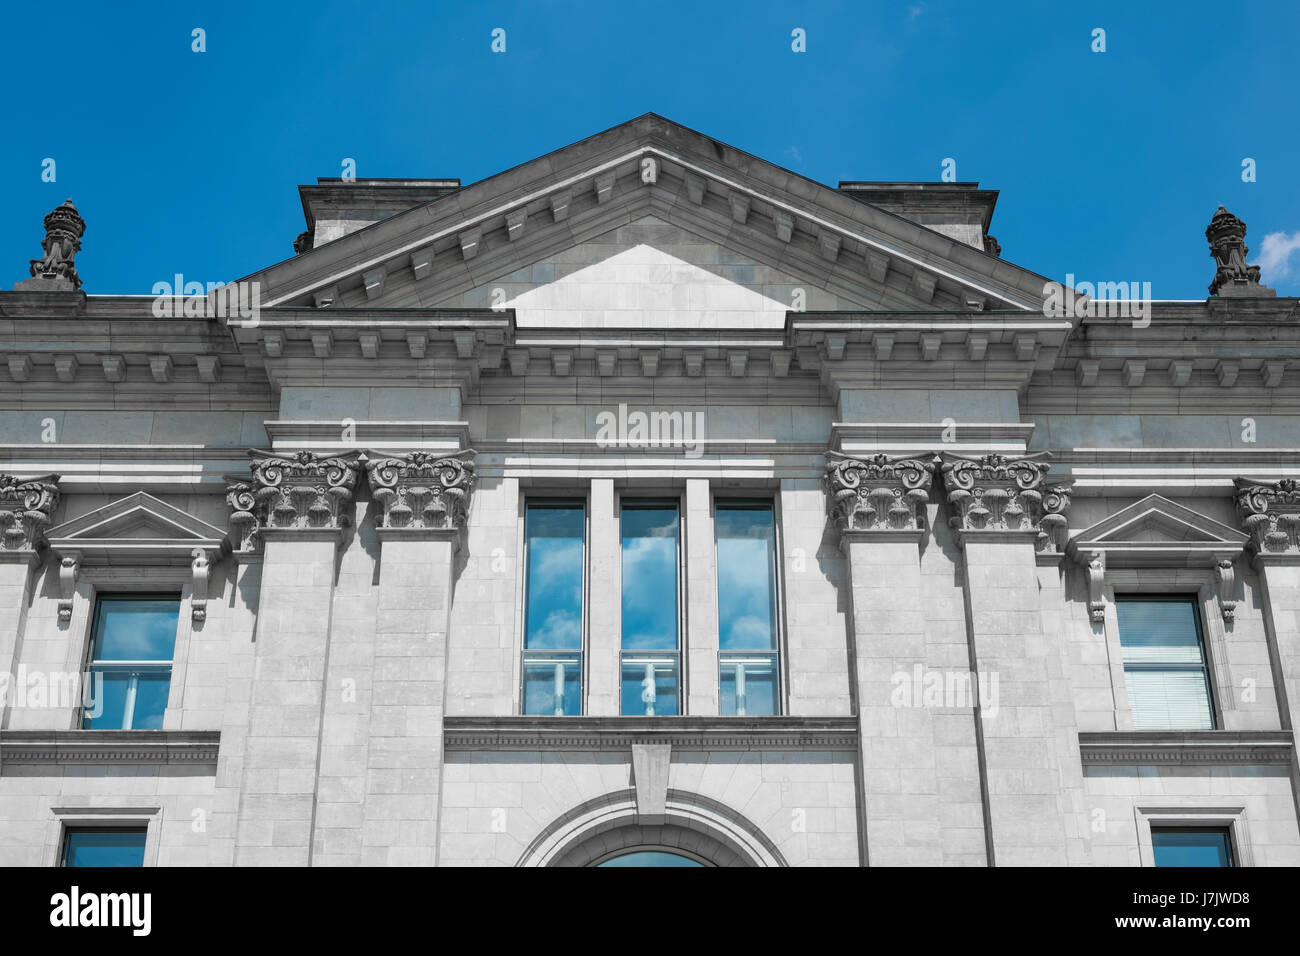 Museum or courtroom exterior - historic facade Stock Photo